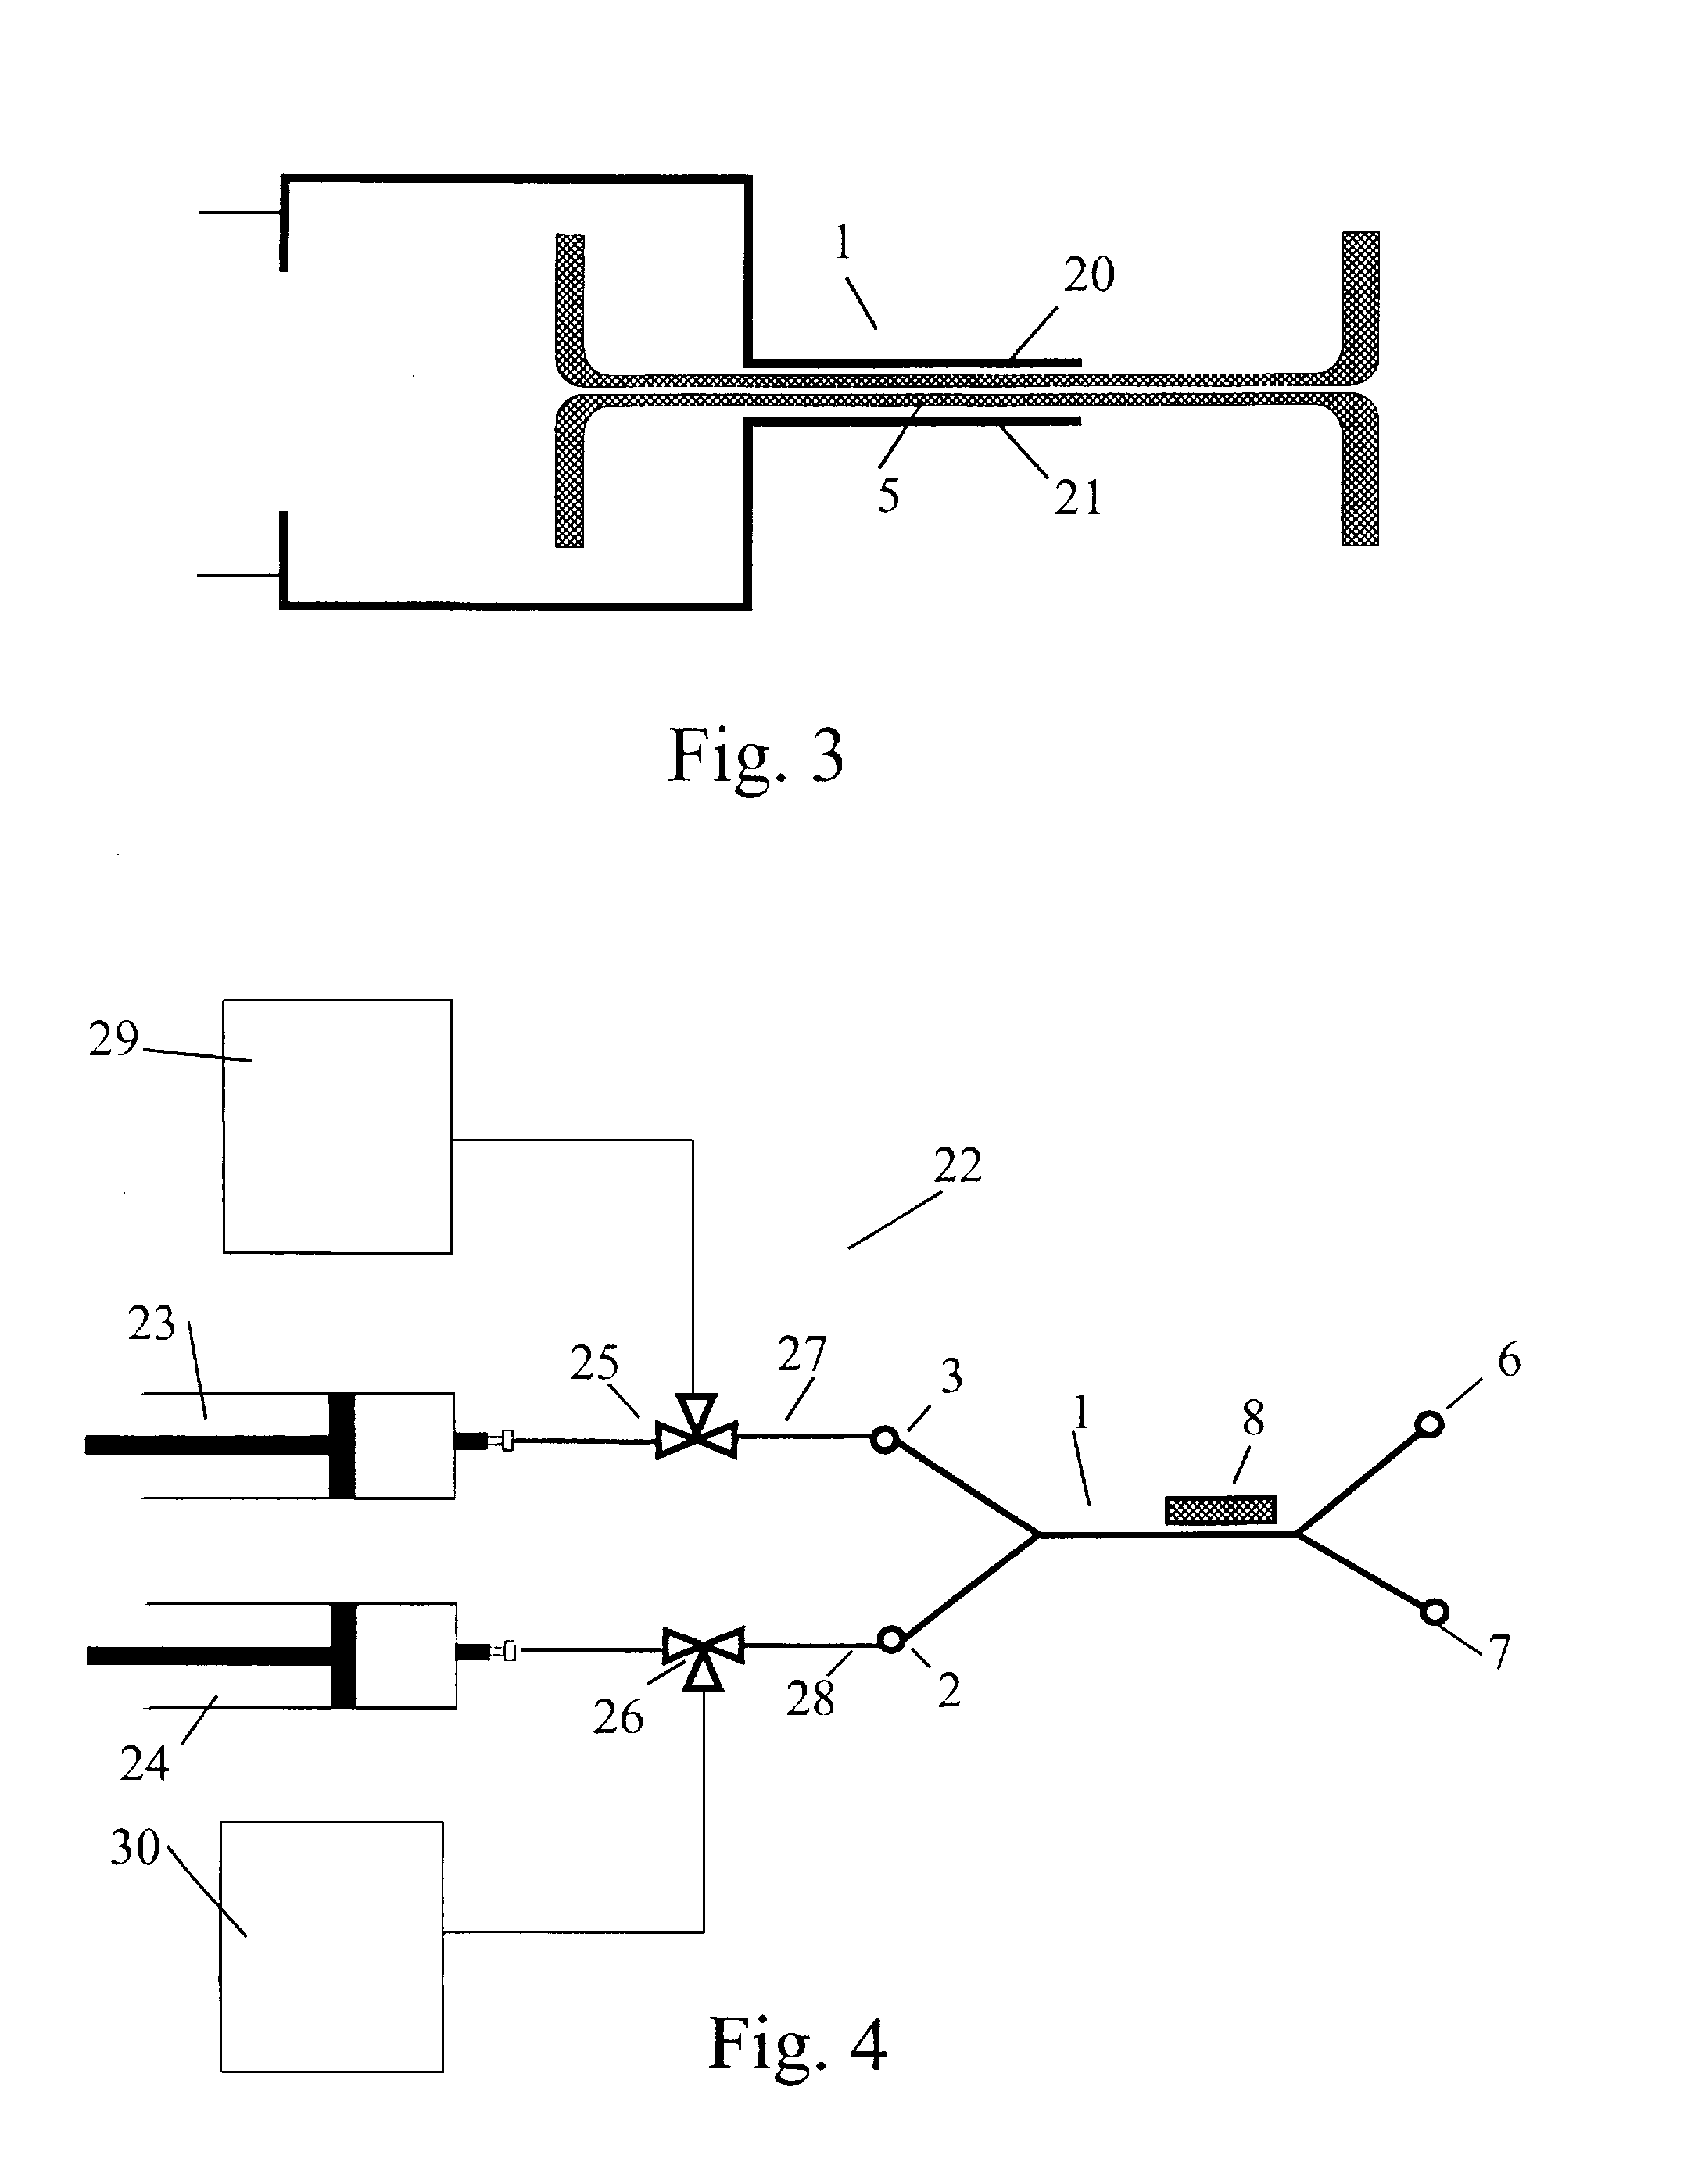 Microflow System for Particle Separation and Analysis